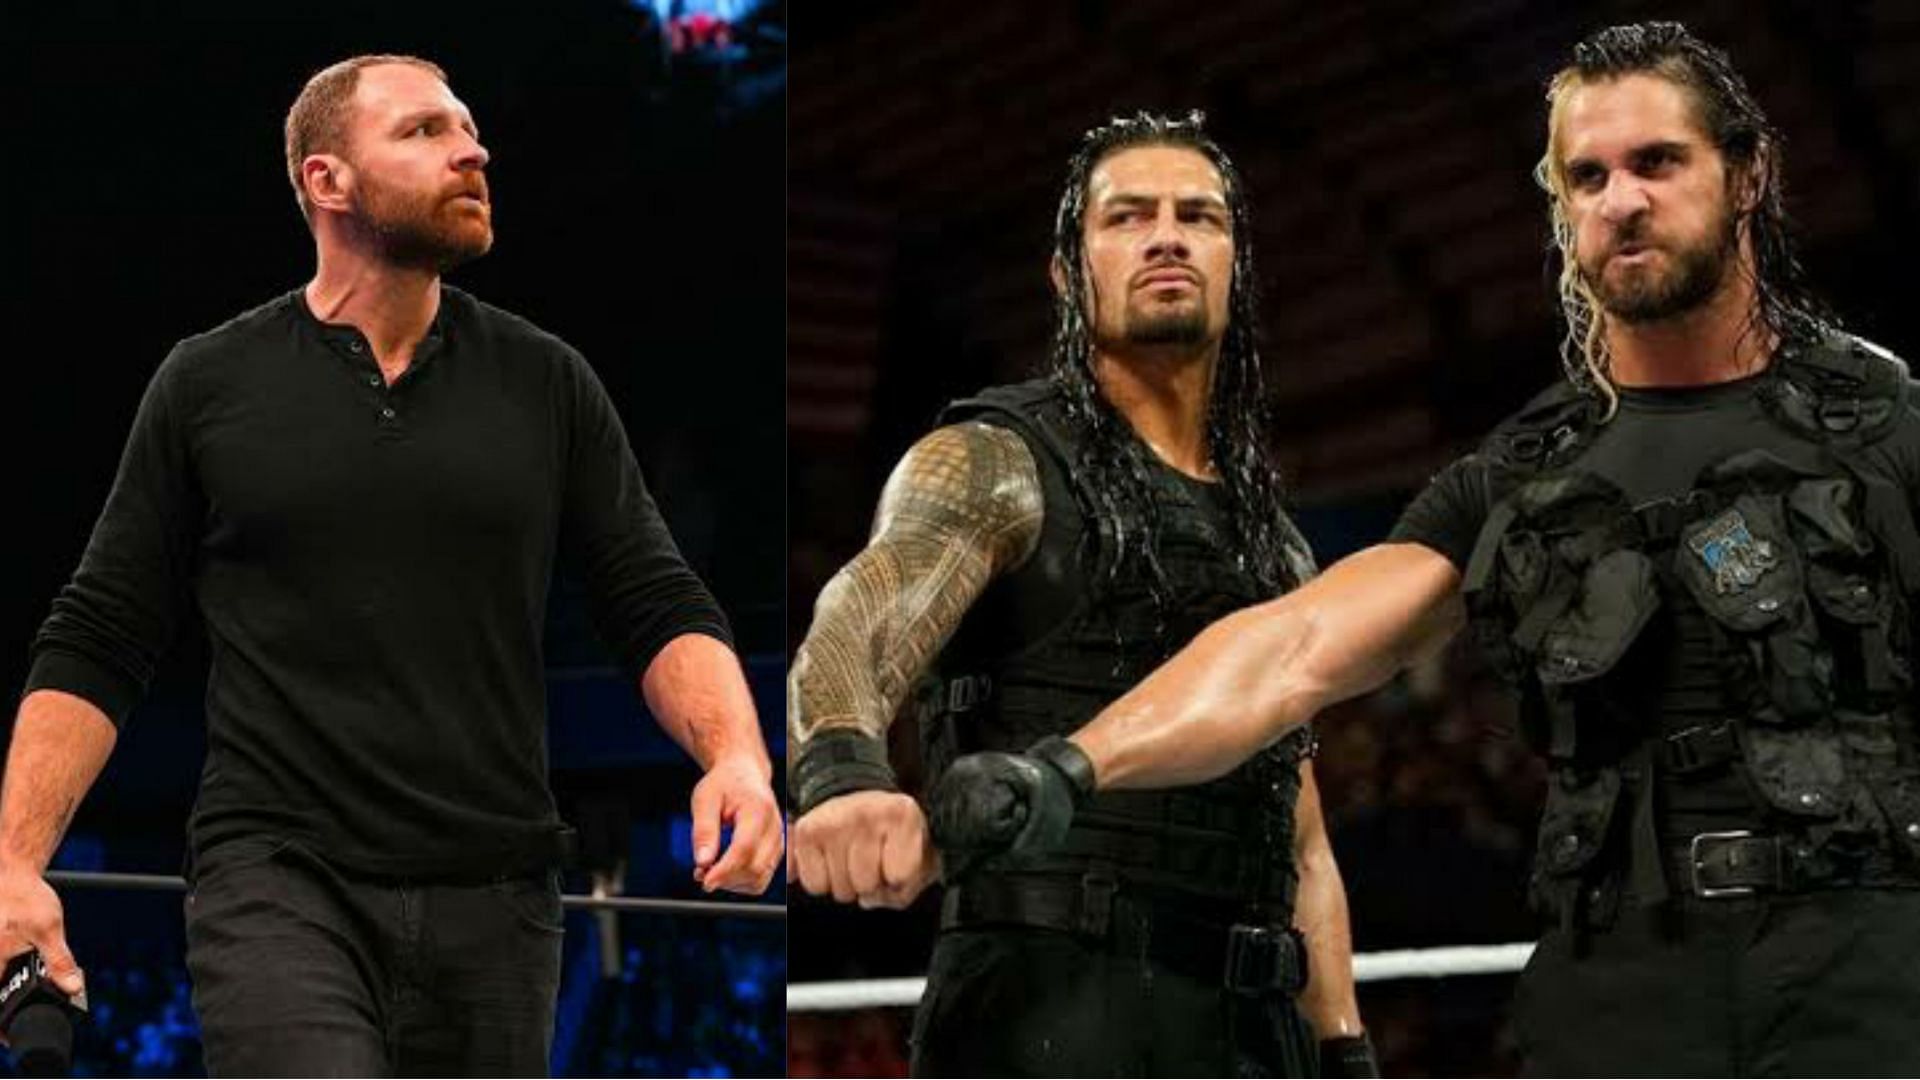 Will Jon Moxley ever reunite with Roman Reigns and Seth Rollins?